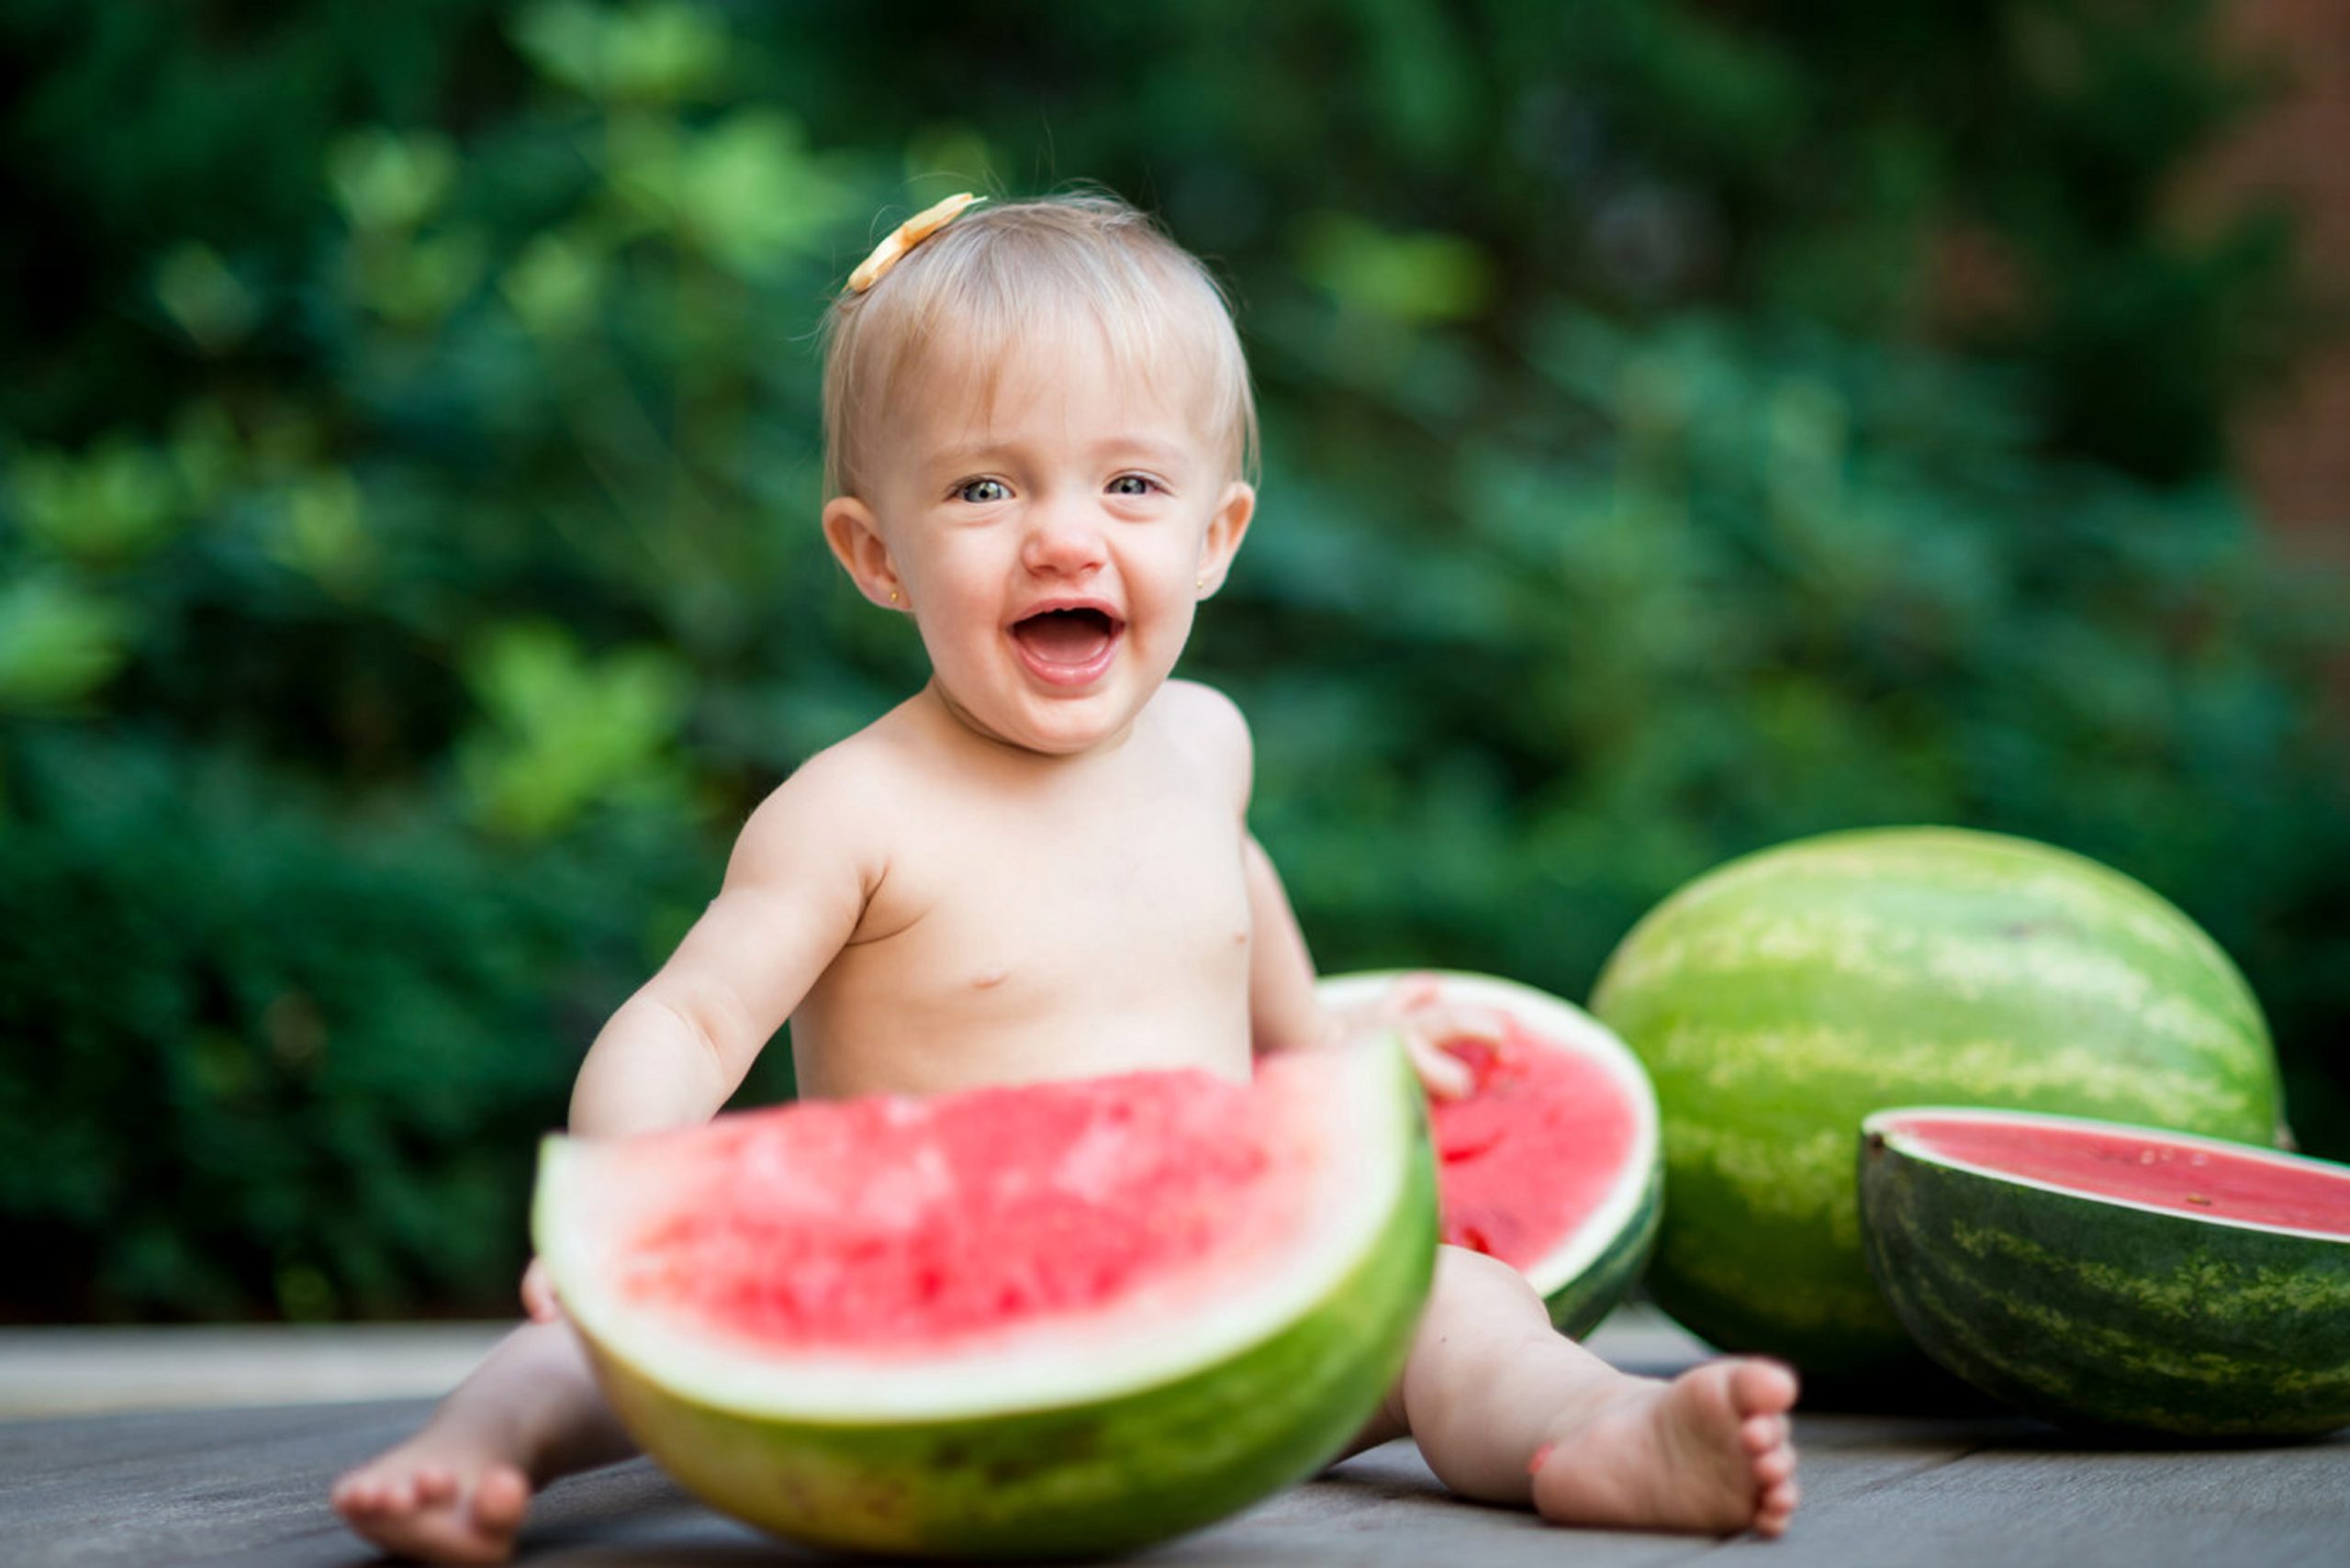 Baby eating watermelon during family session 2020